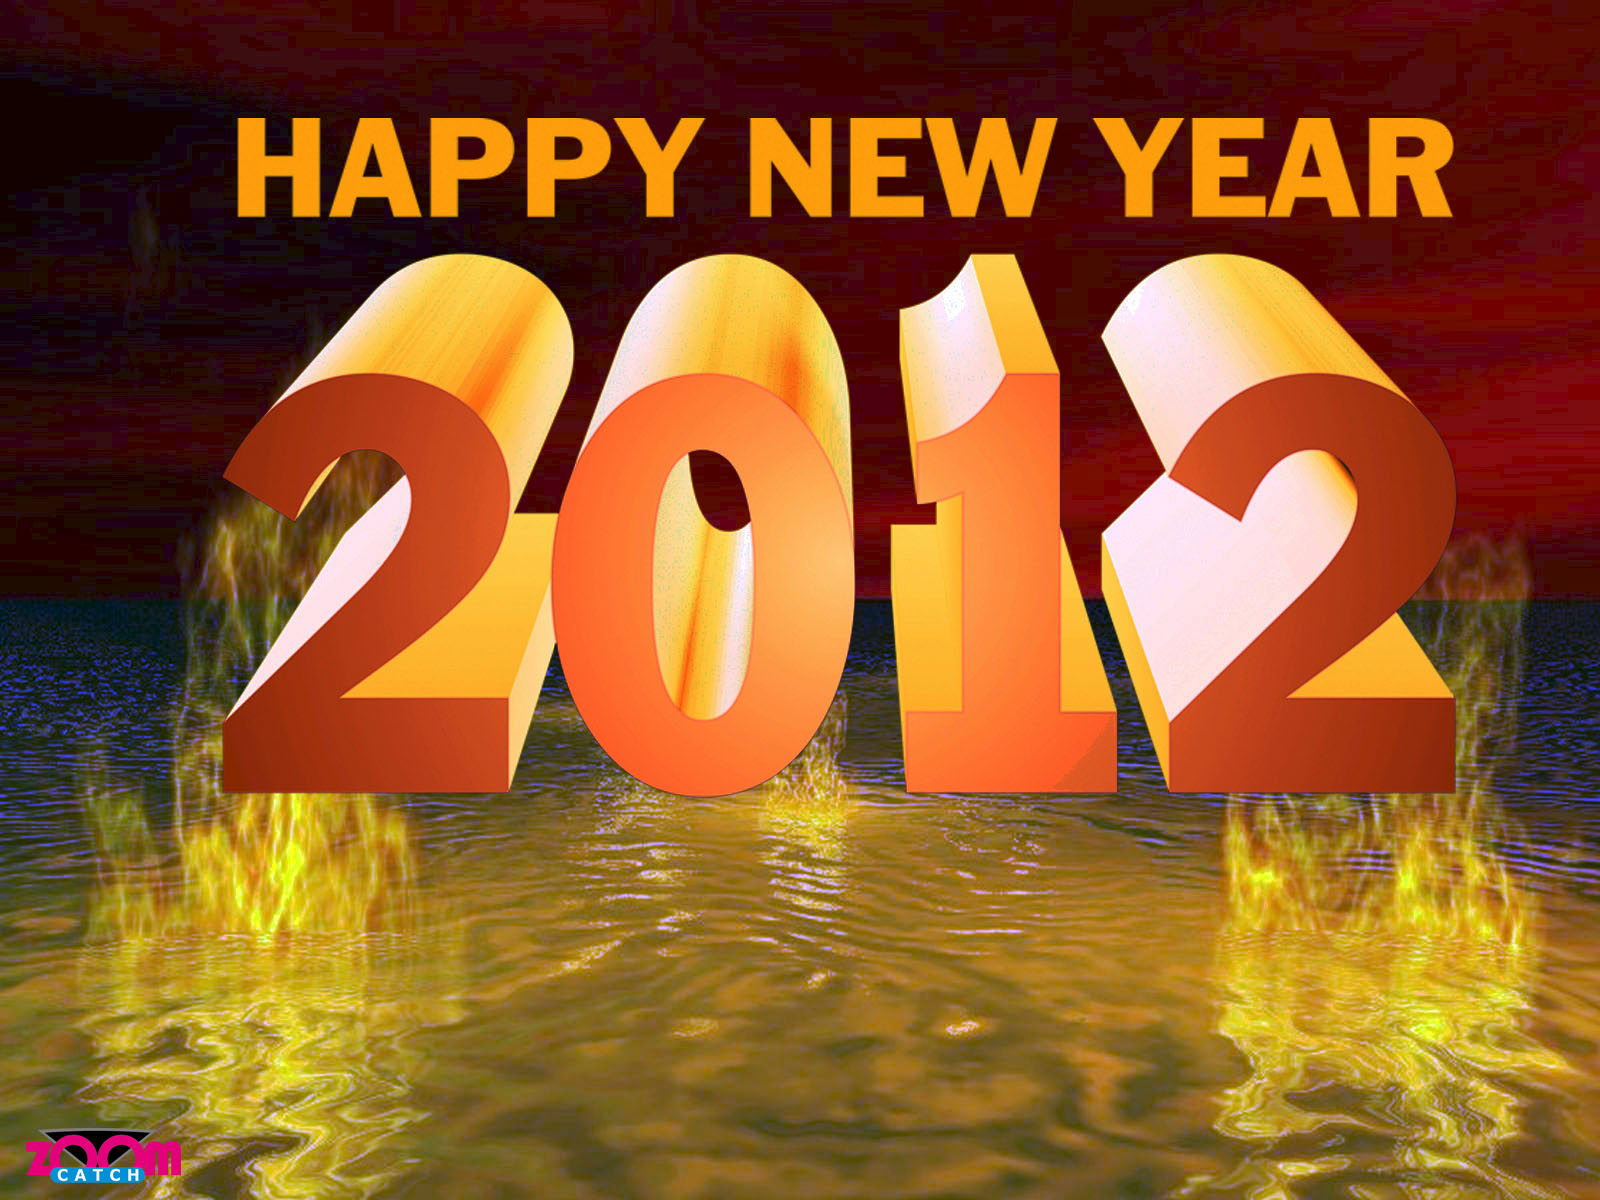 New Year 2012 High Quality Images and Wallpapers-15